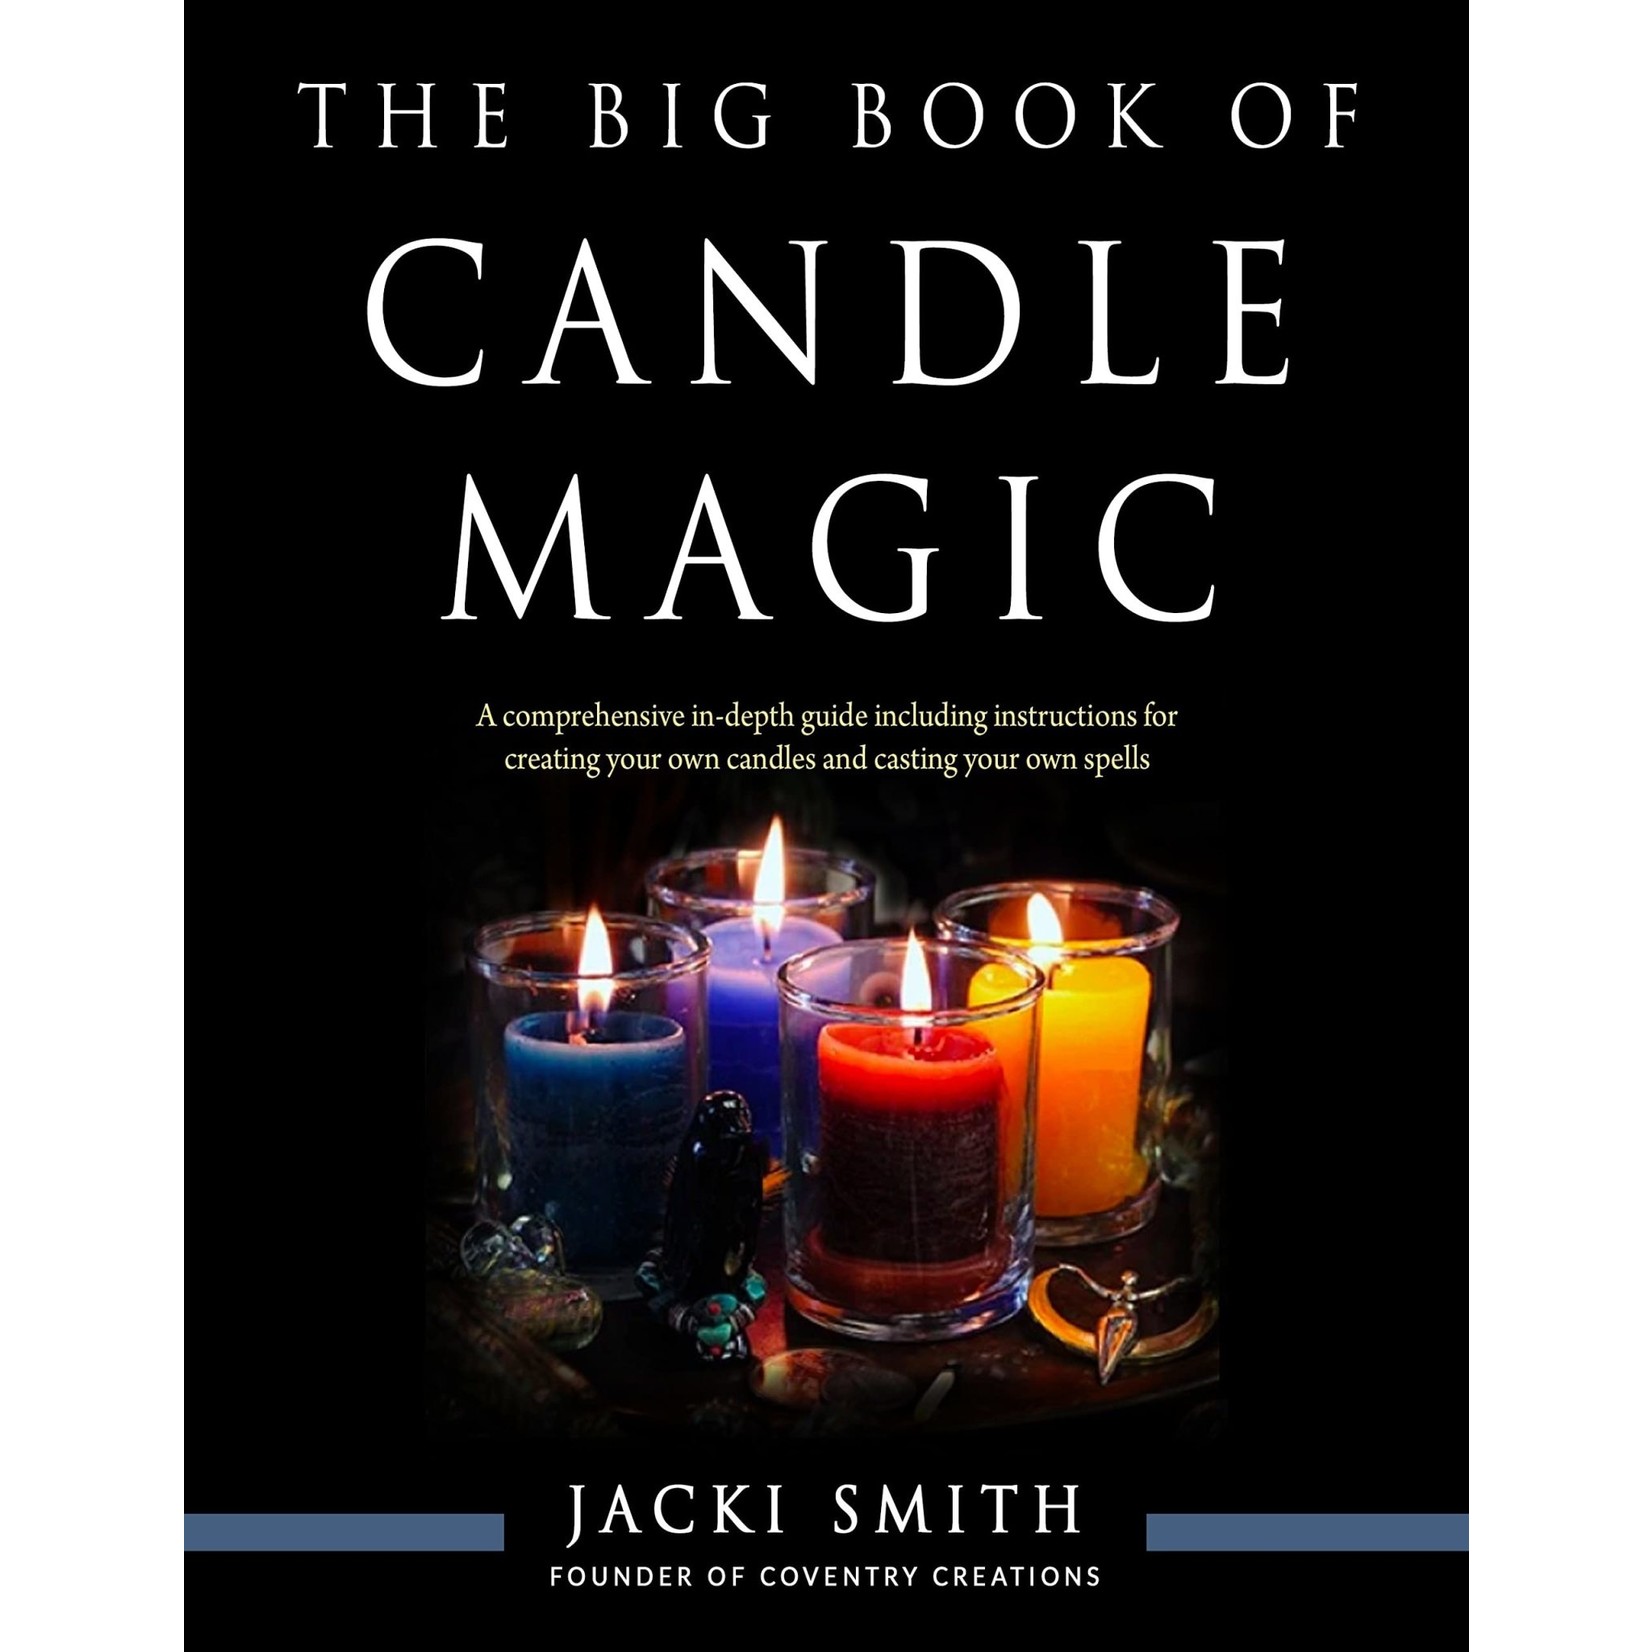 The Big Book of Candle Magic by Jacki Smith